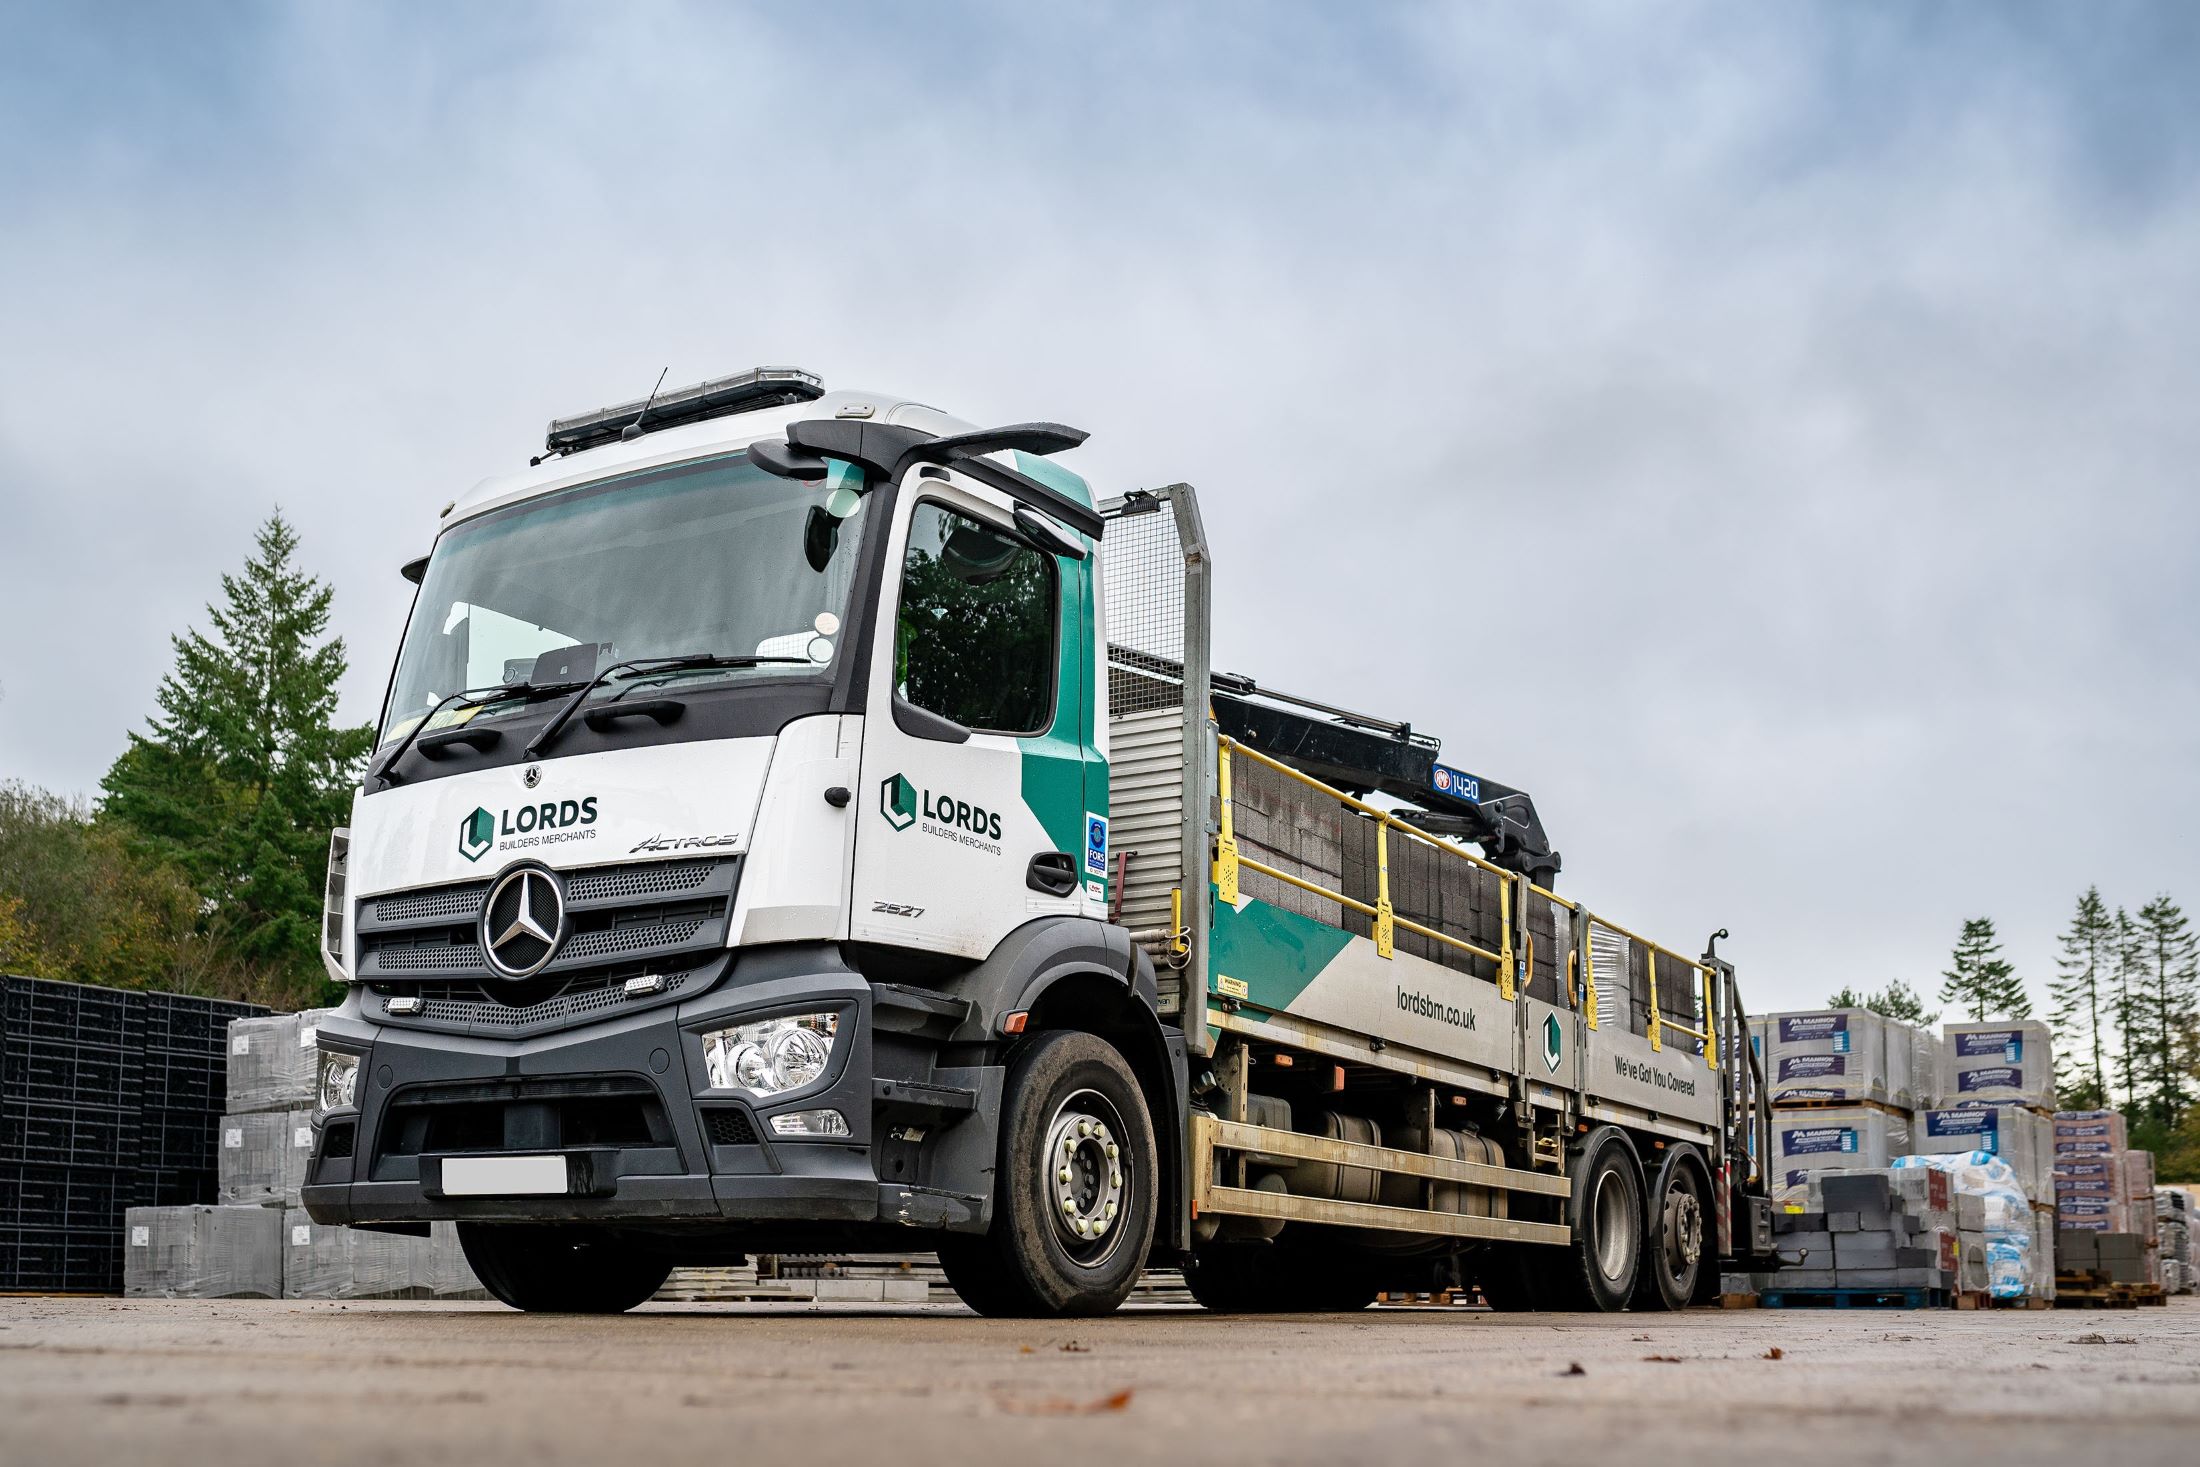 FVTH has recently supplied Lords Builders Merchants with an additional eight vehicles which mirror its existing fleet.